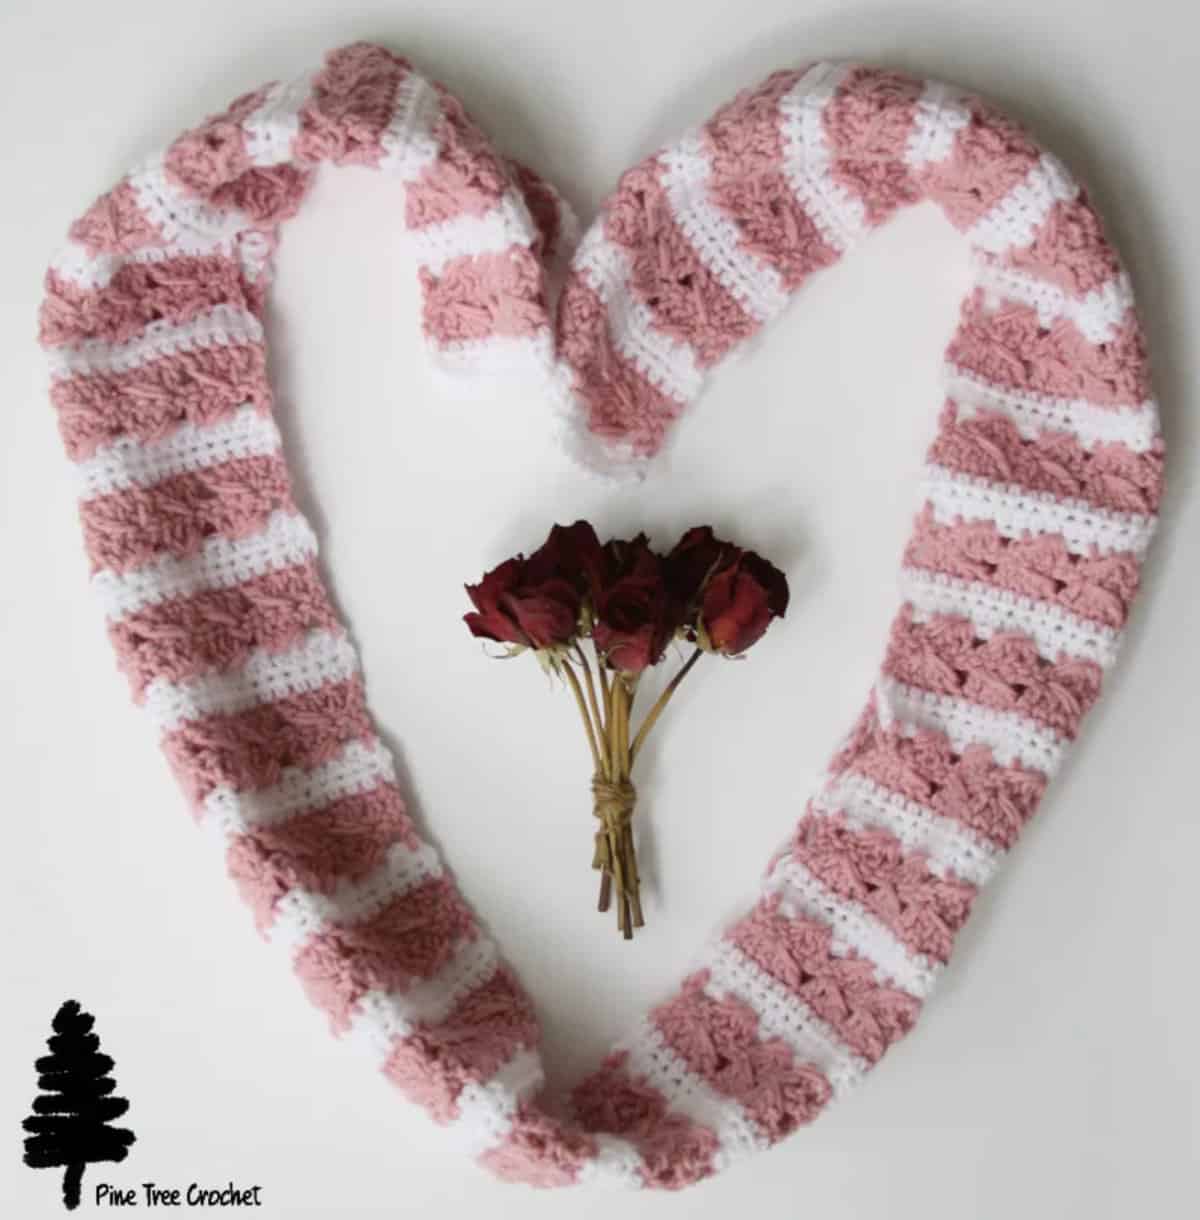 Pink and white striped crochet scarf posed in the shape of a heart with dried roses in the center.